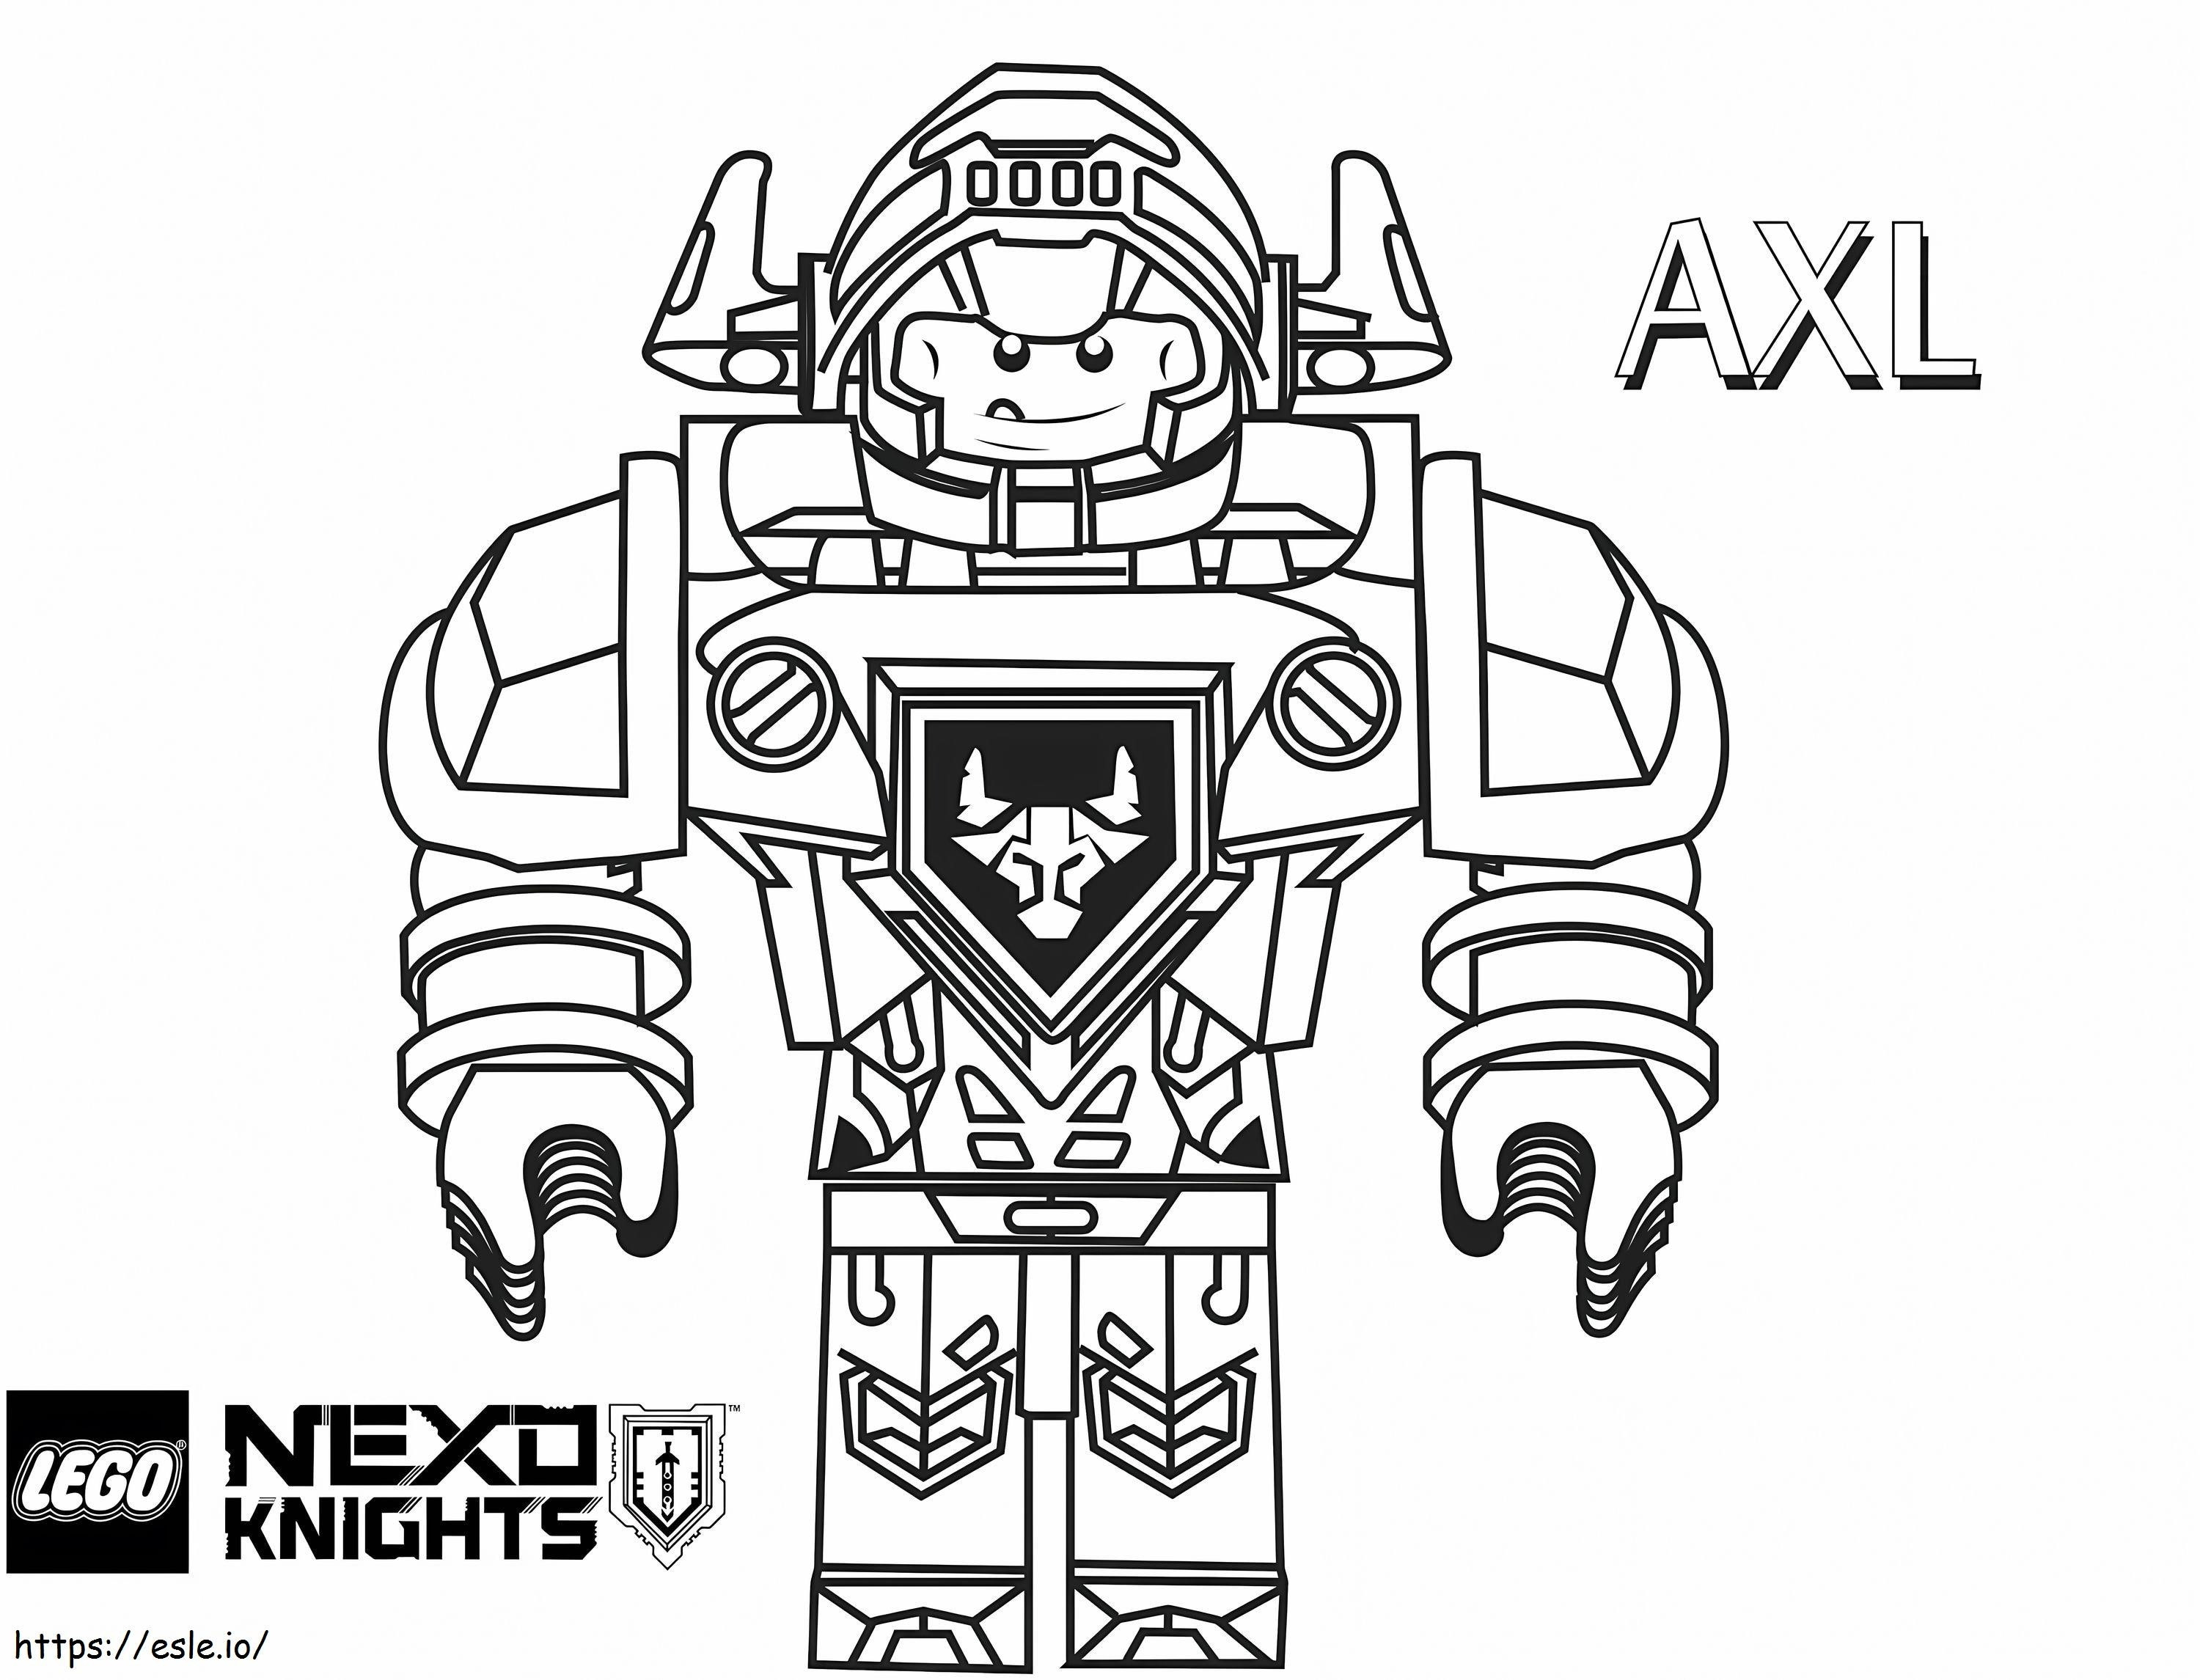 Axl Knights coloring page